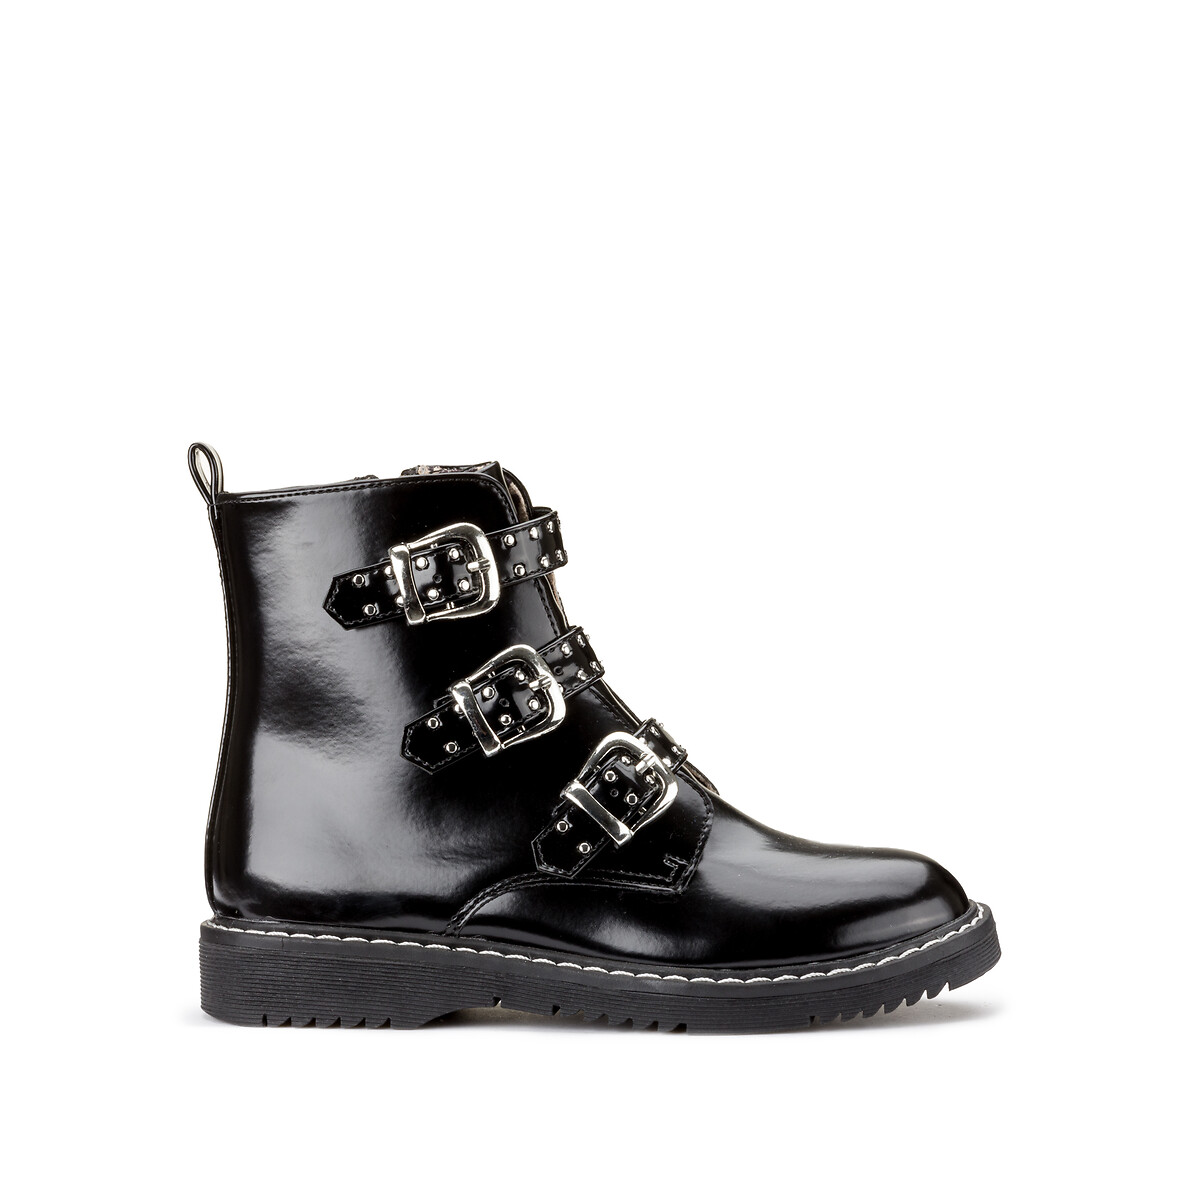 Kids Ankle Boots with Zip Fastening